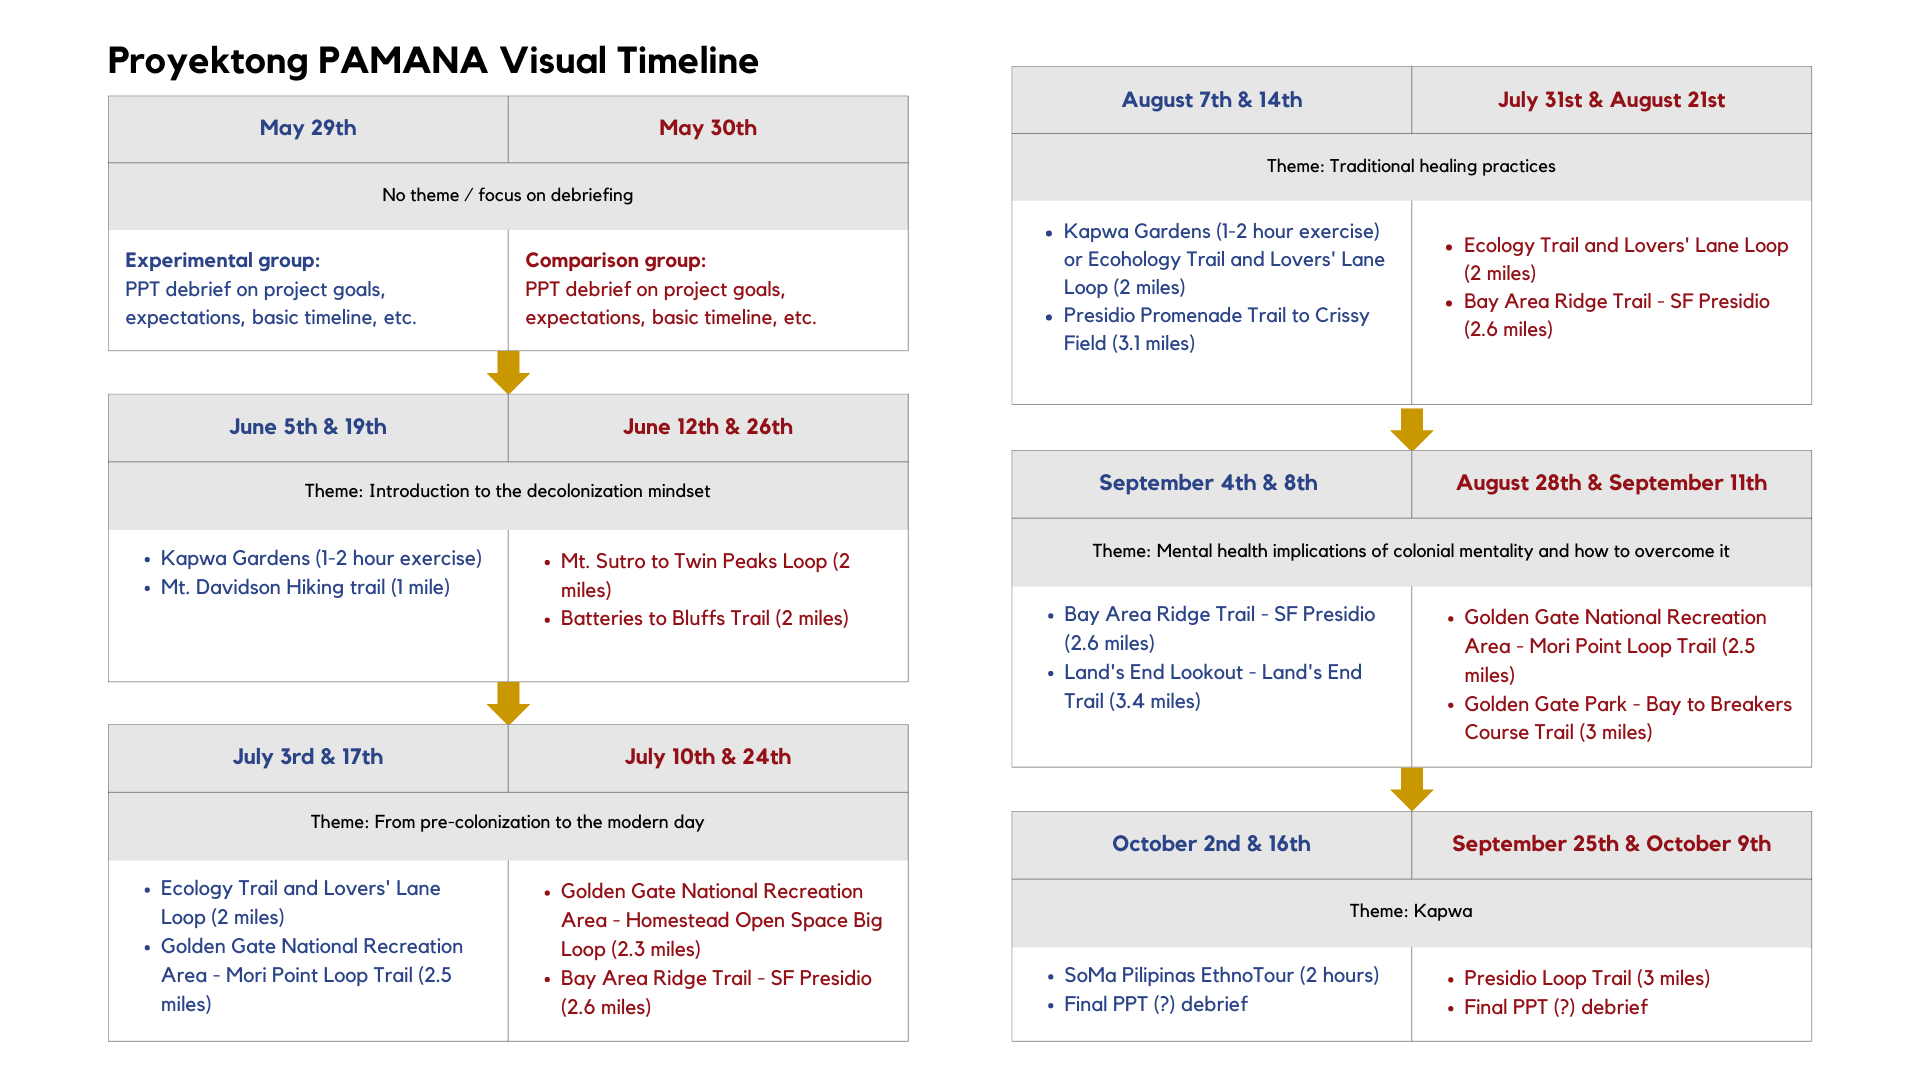 Visual diagram of the Proyektong PAMANA timeline